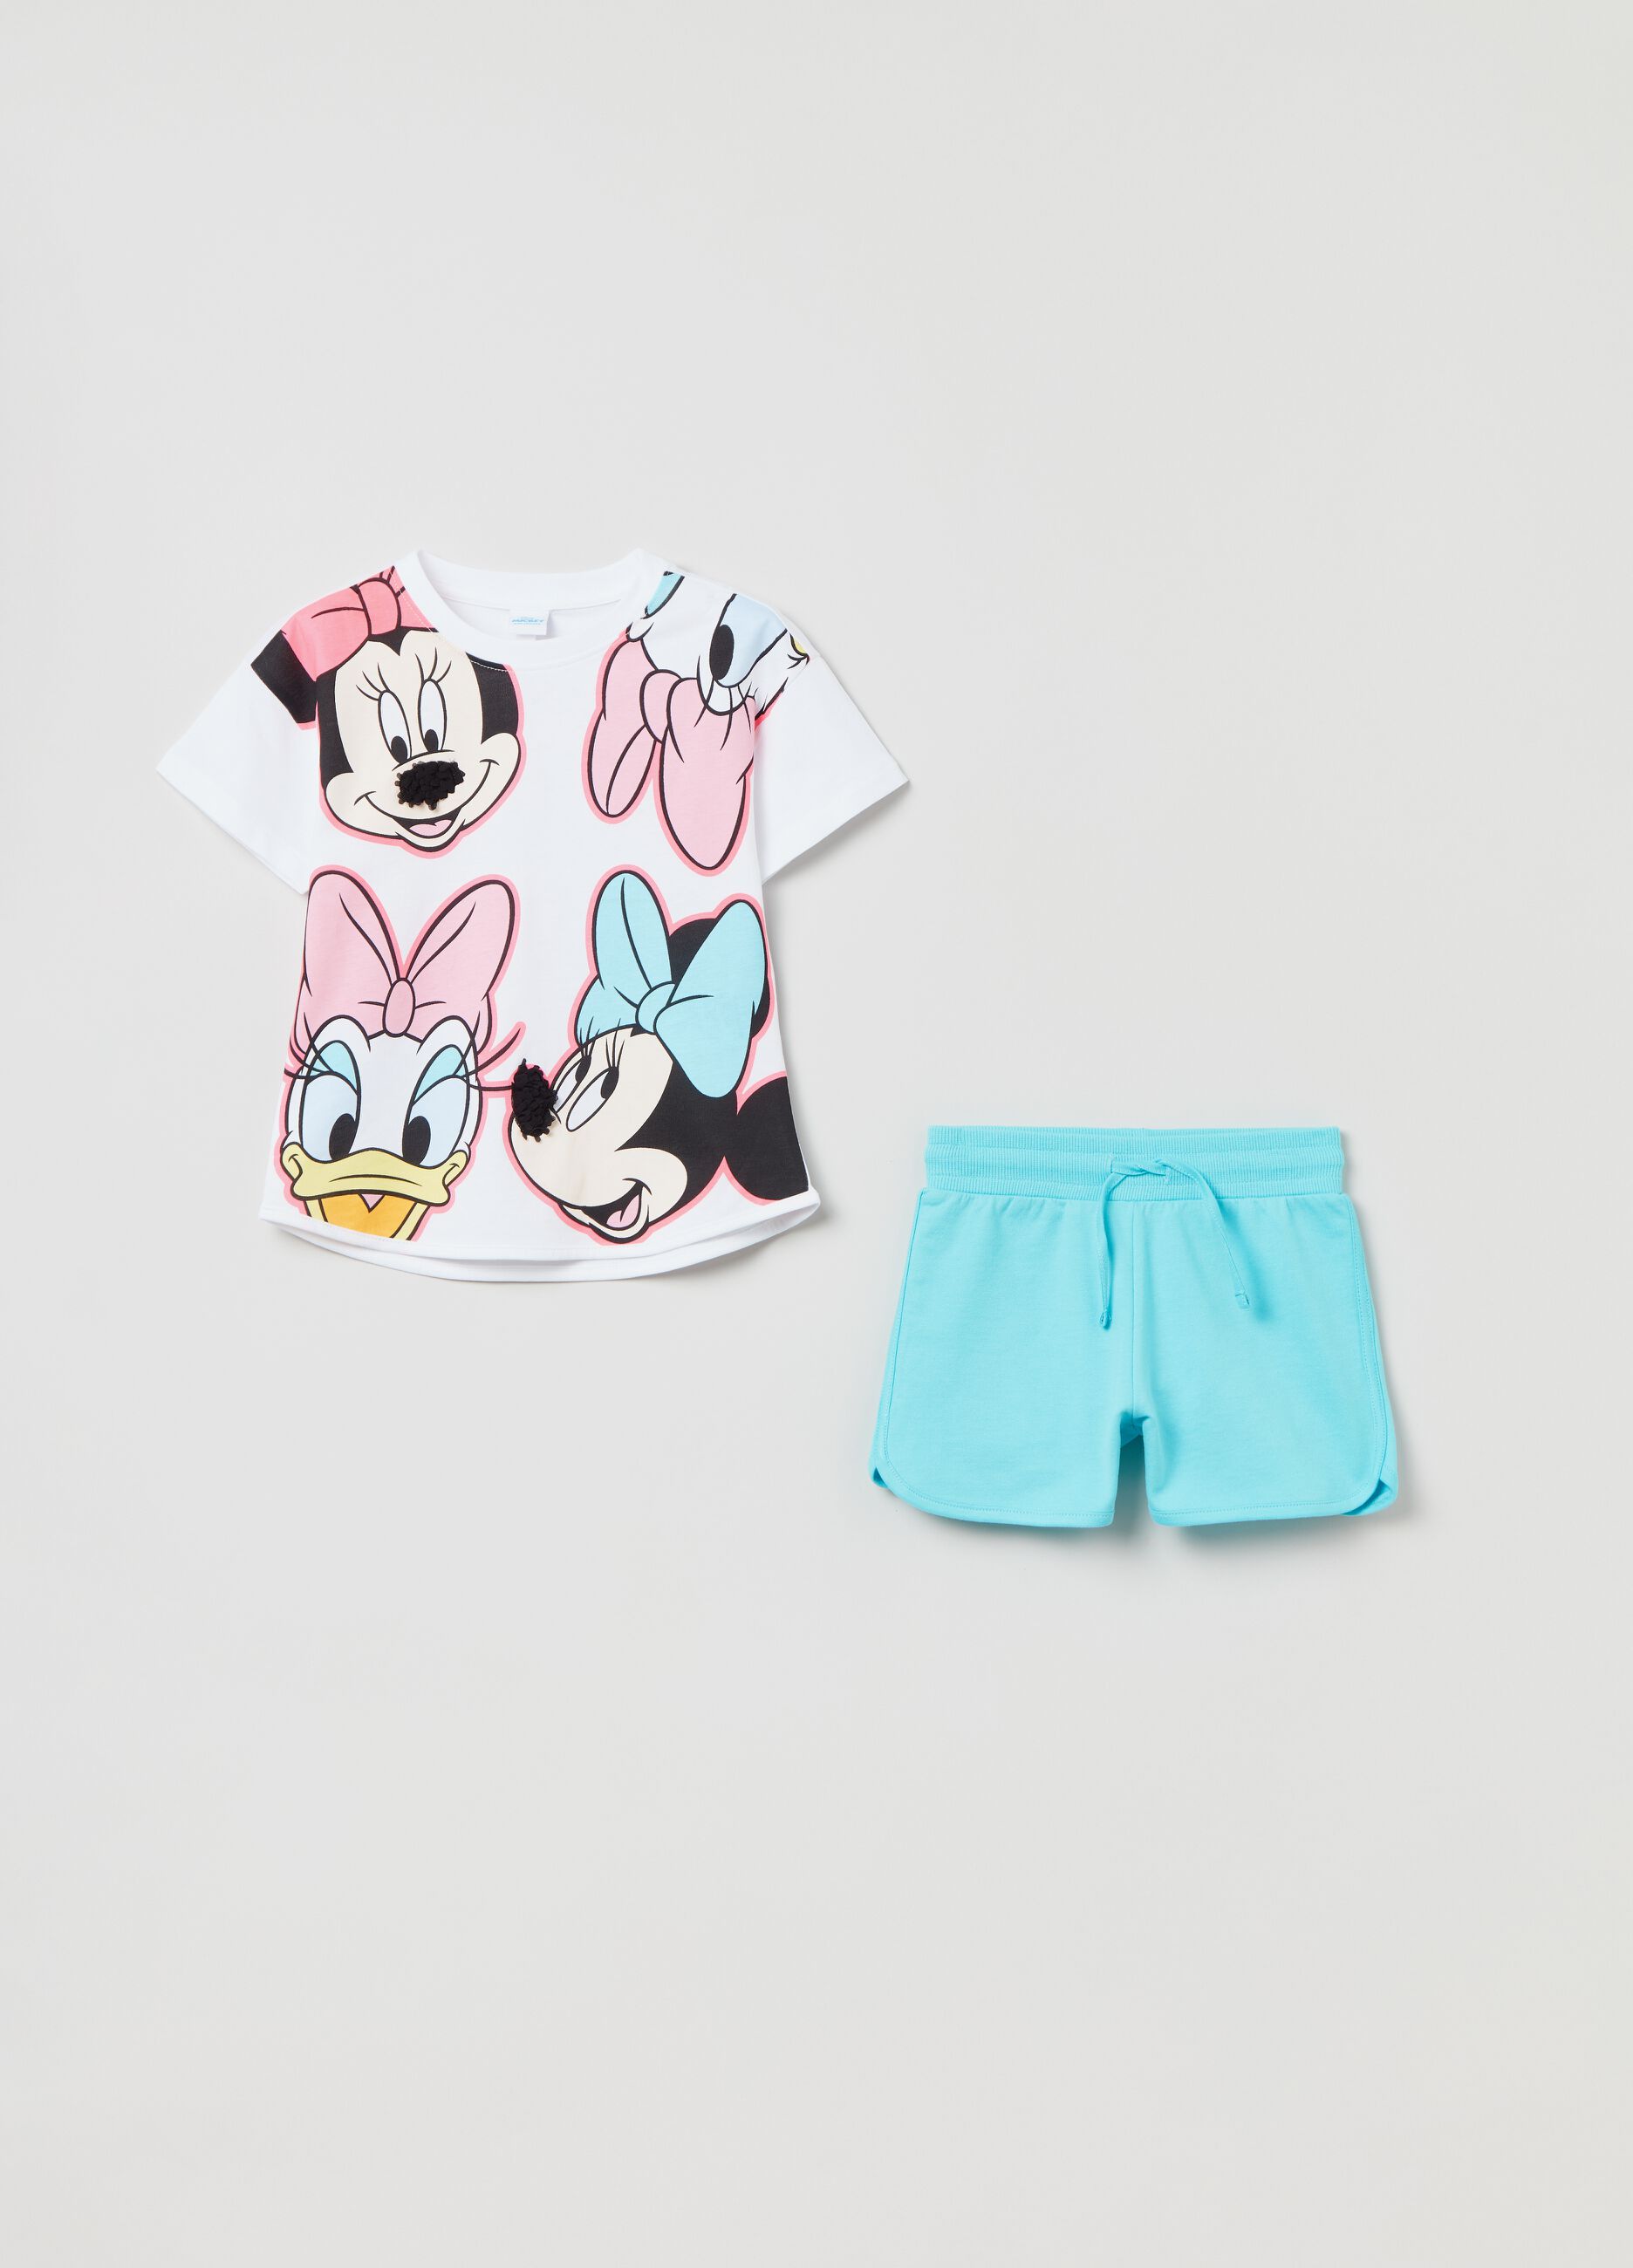 Disney Daisy Duck and Minnie Mouse jogging set